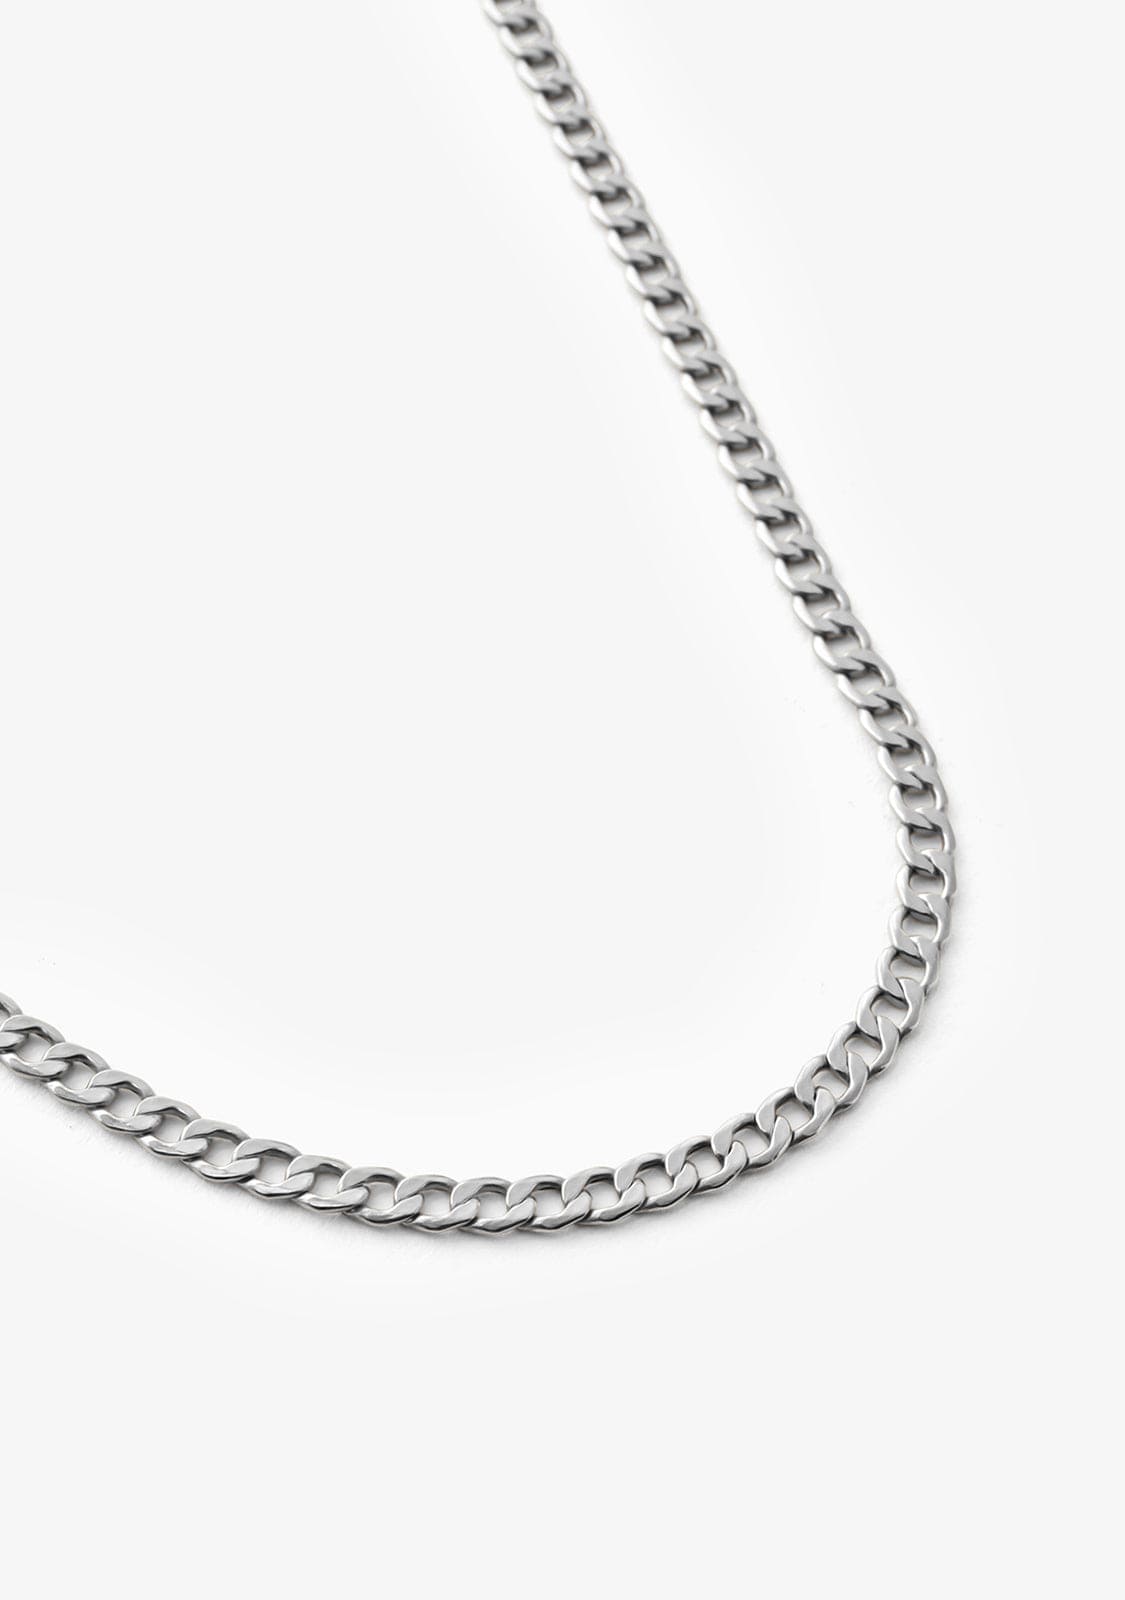 Chain Replay Silver